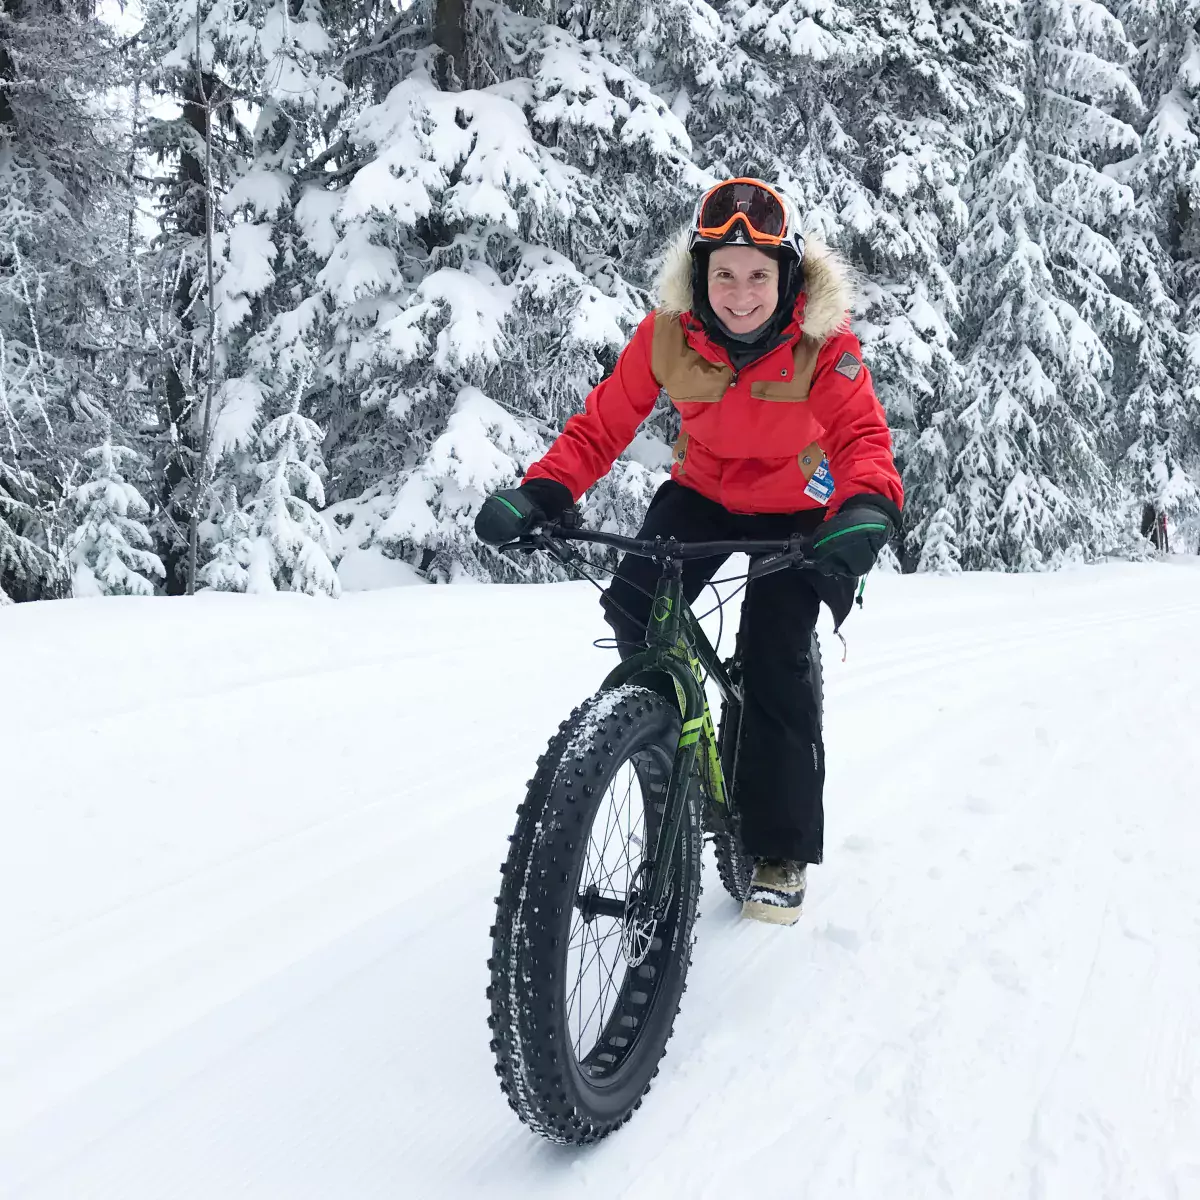 Trying out a fat bike for the first time